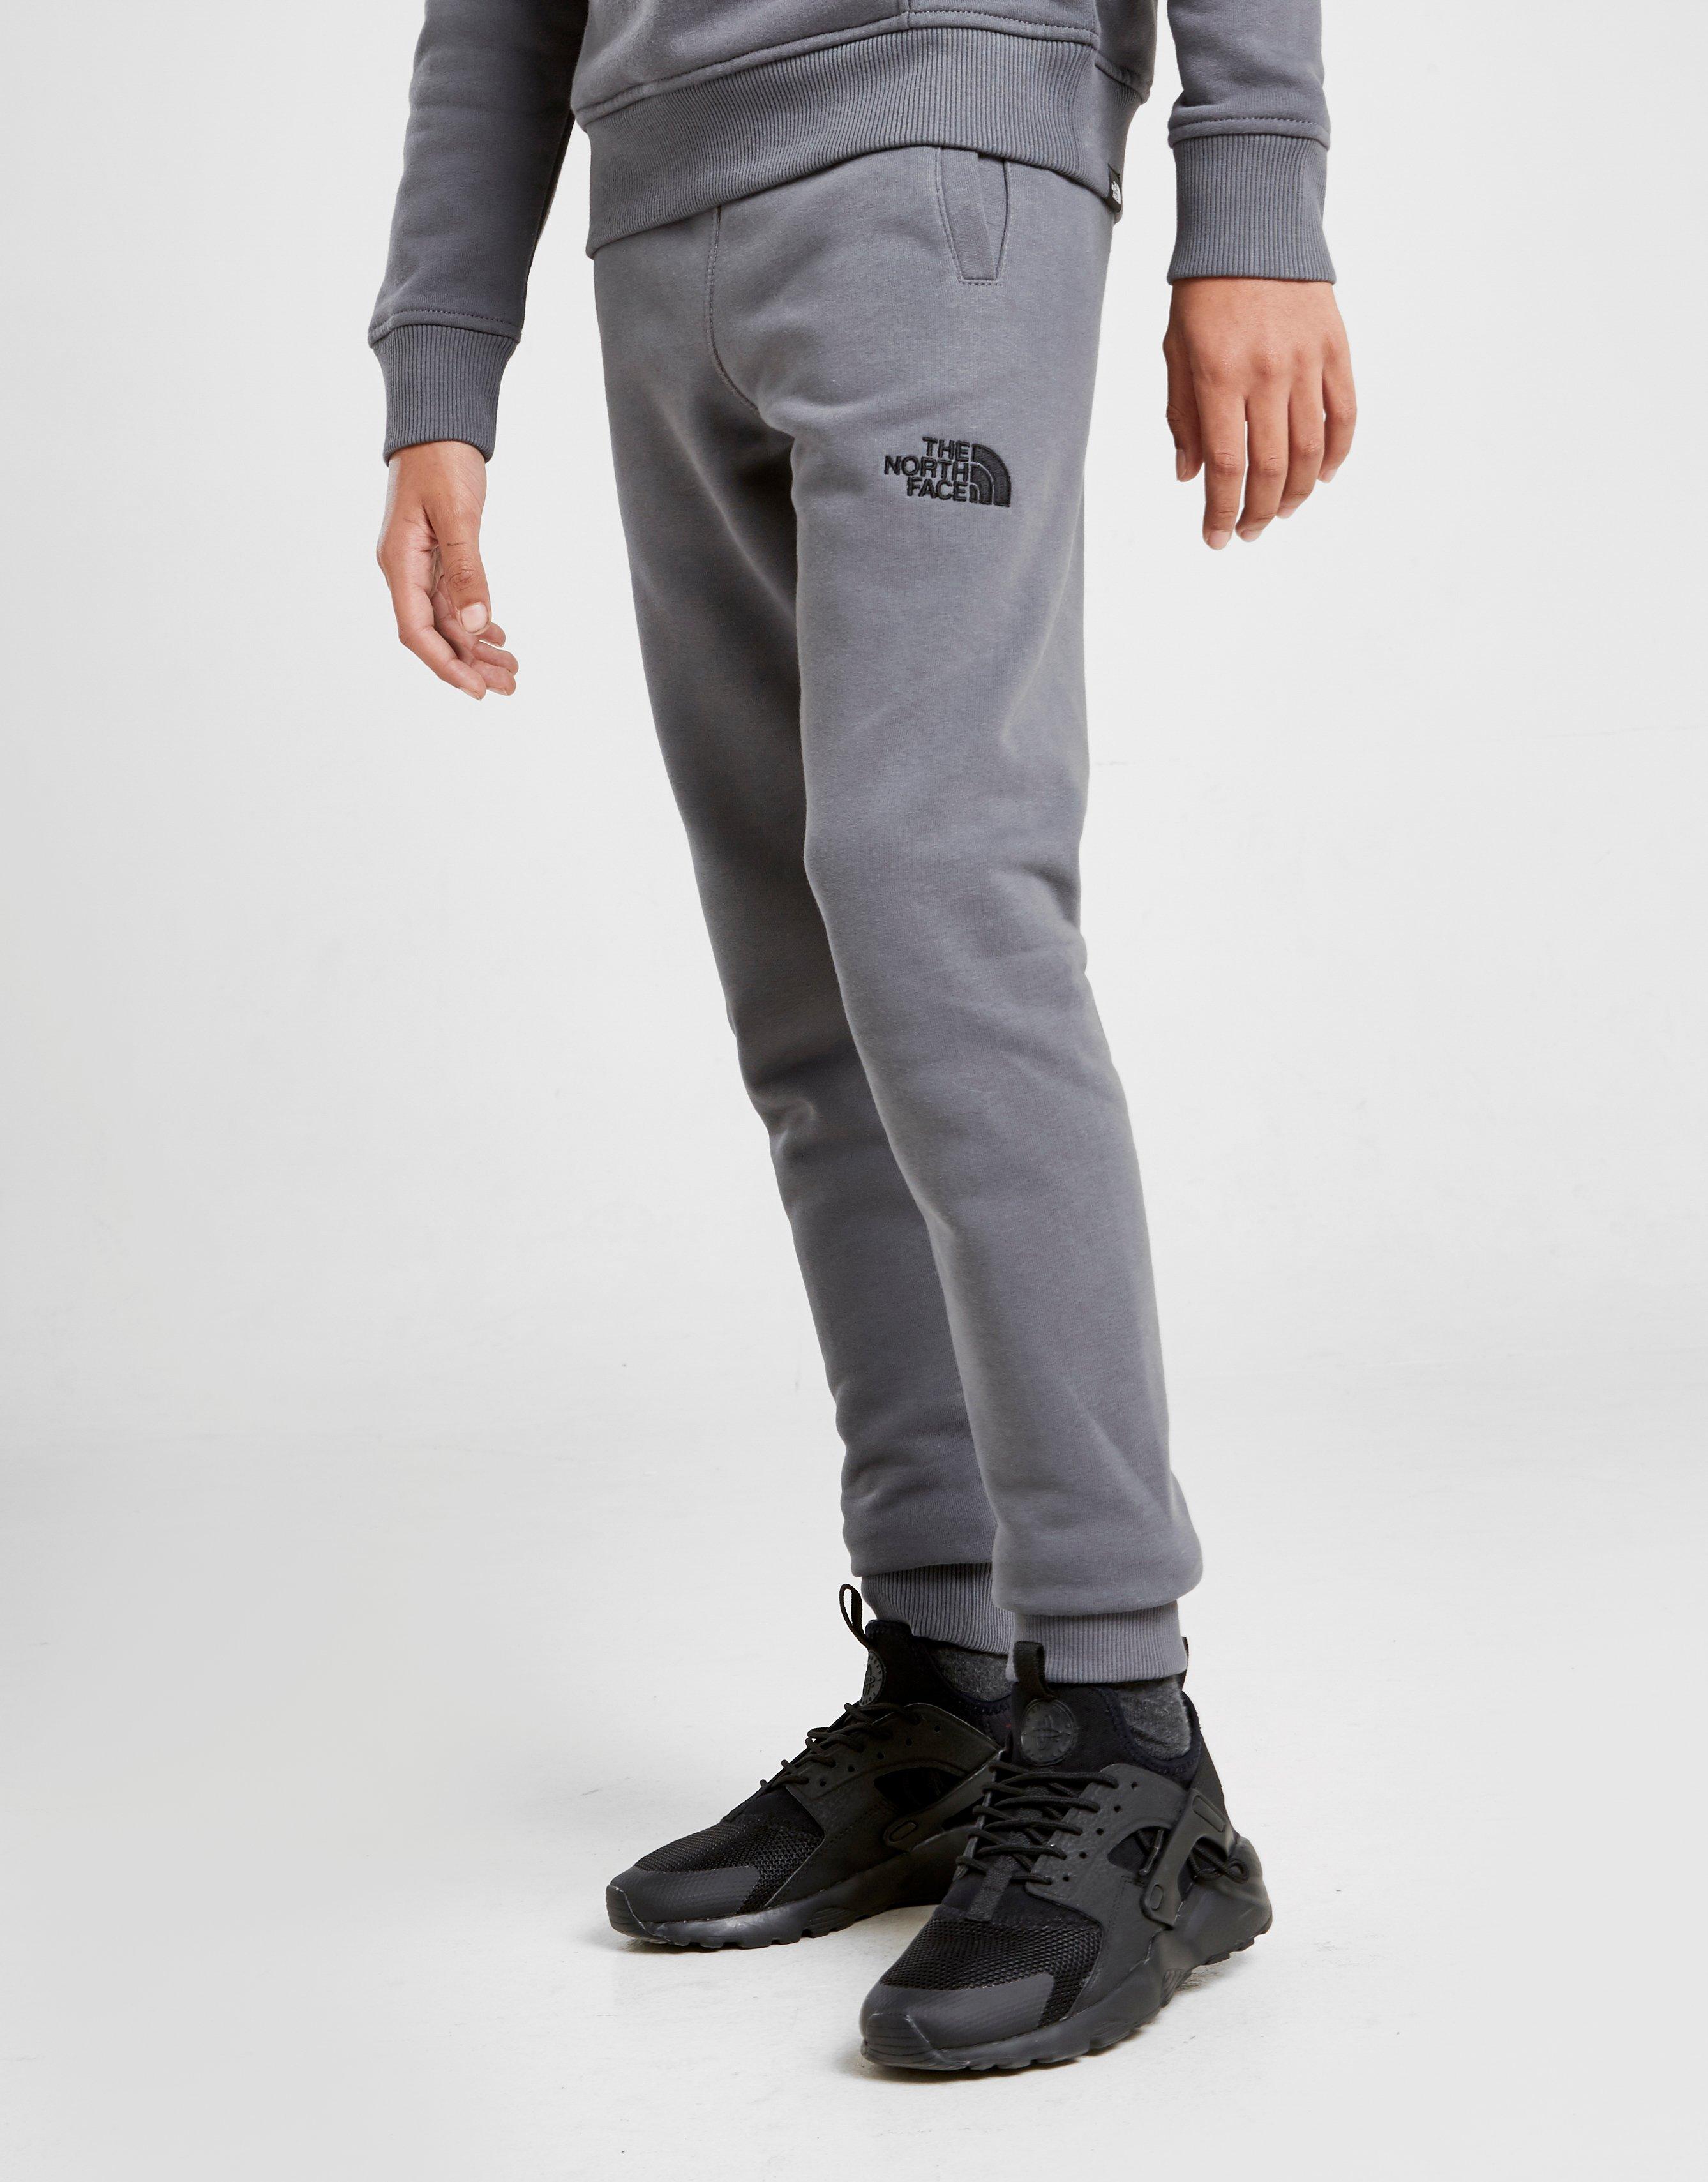 jd north face joggers